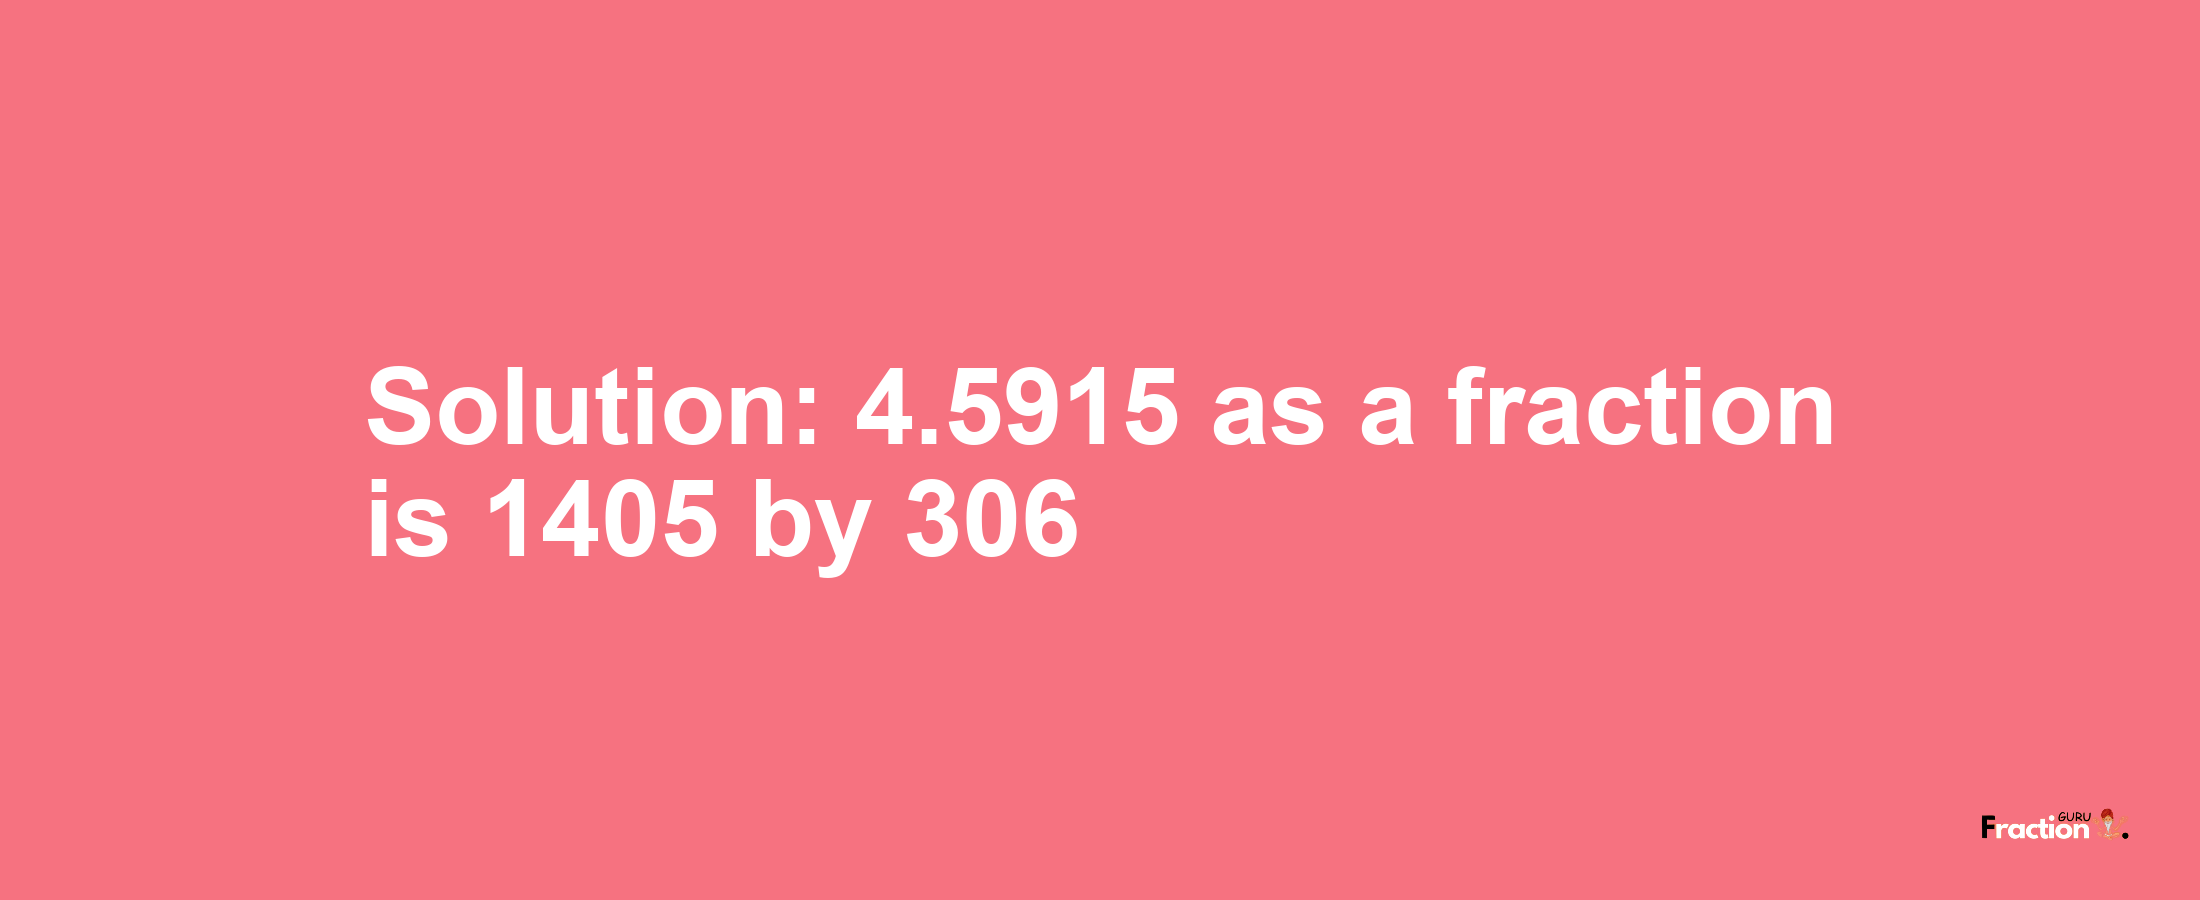 Solution:4.5915 as a fraction is 1405/306